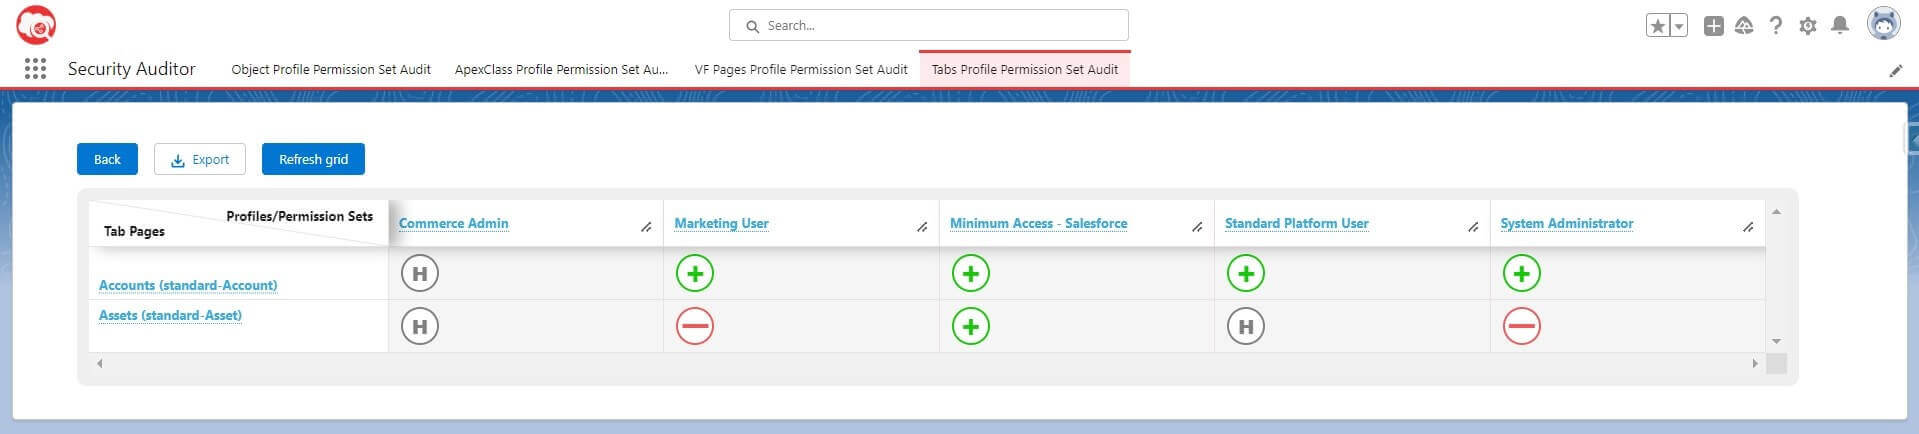 A screenshot of the Tabs permissions matrix in Security Auditor